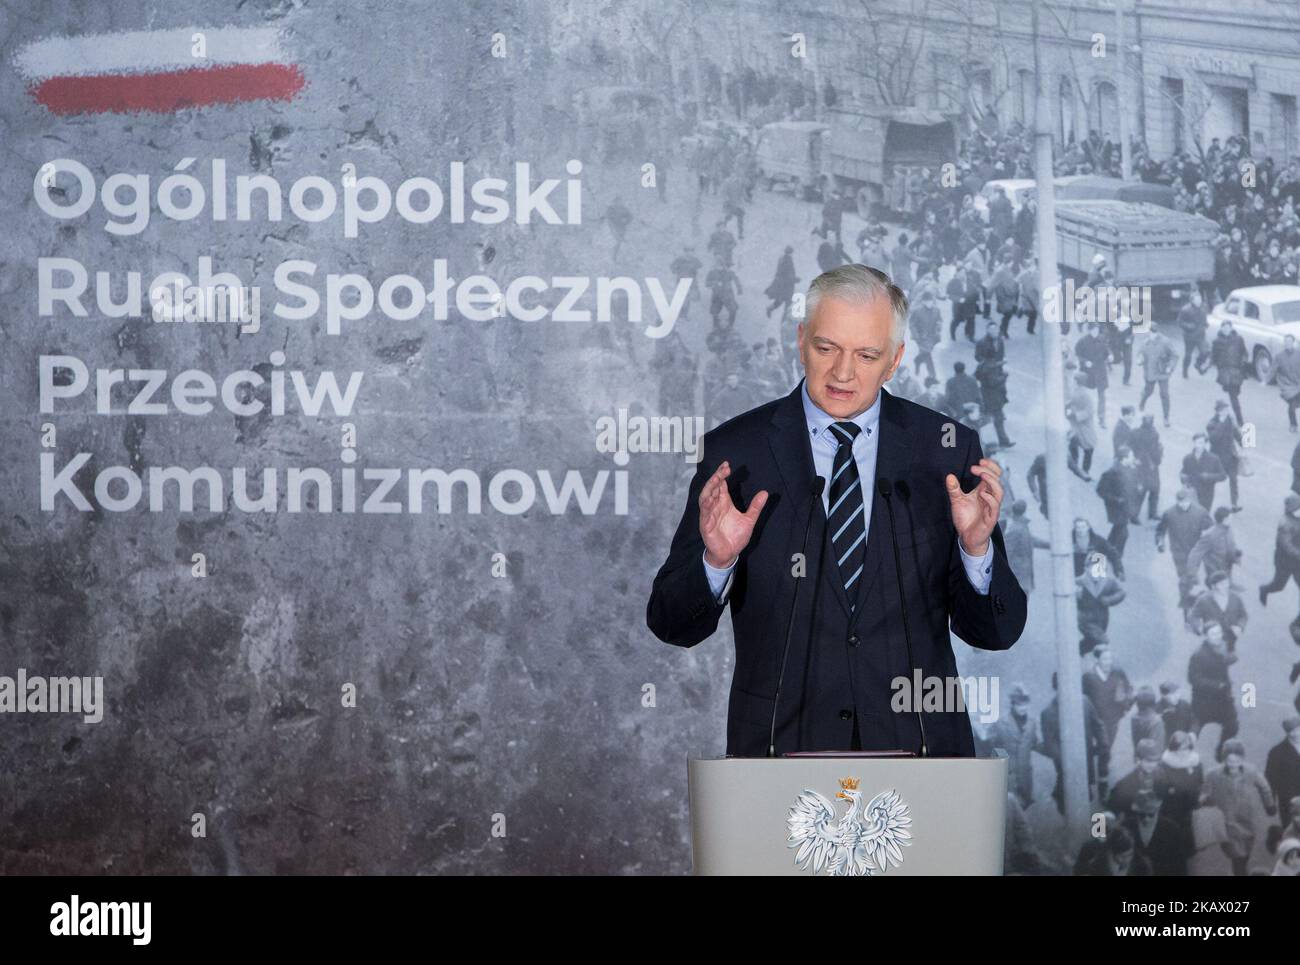 Minister of Science and Higher Education Jaroslaw Gowin during the debate about 'March 1968' (1968 Polish political crisis) at University of Warsaw, in Warsaw, Poland on 7 March 2018 (Photo by Mateusz Wlodarczyk/NurPhoto) Stock Photo